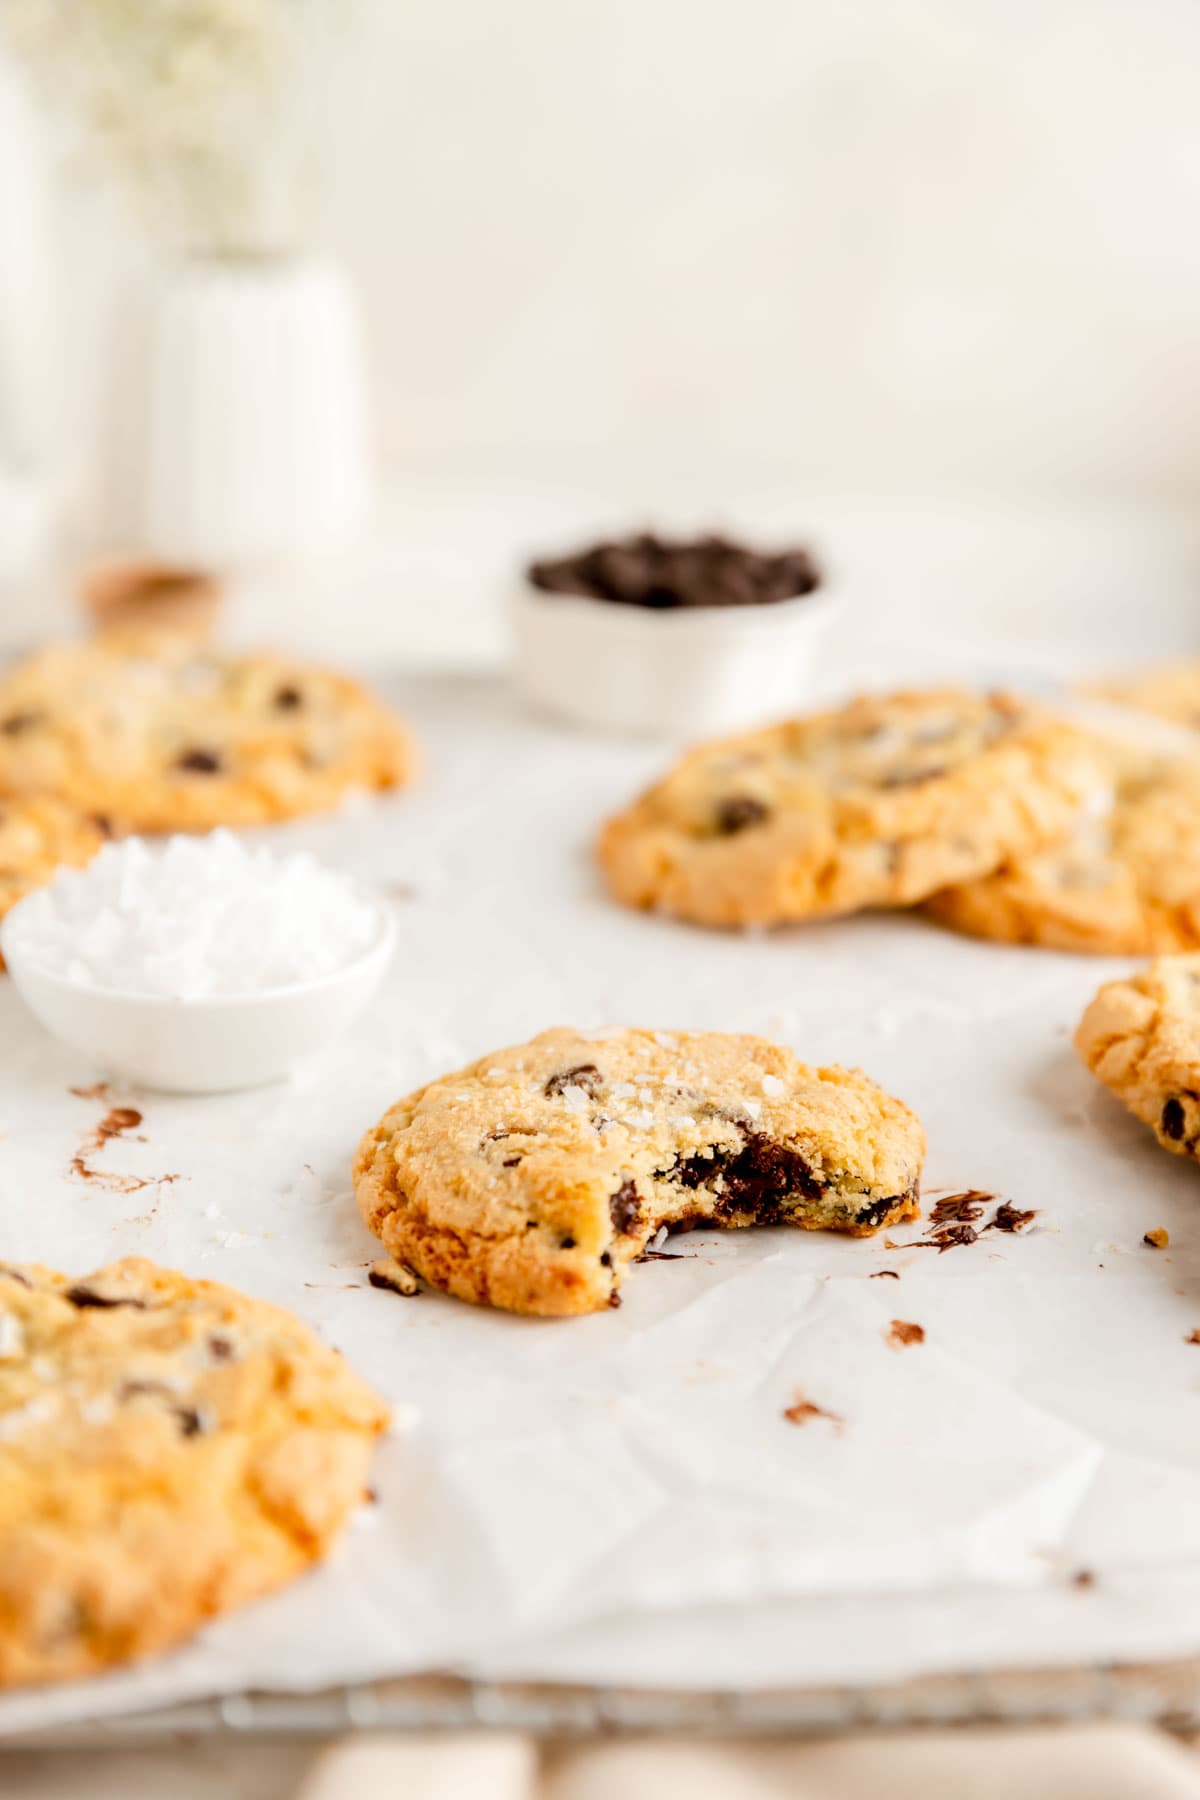 thick chocolate chip cookie with bite out and other cookies and ingredient bowls in background